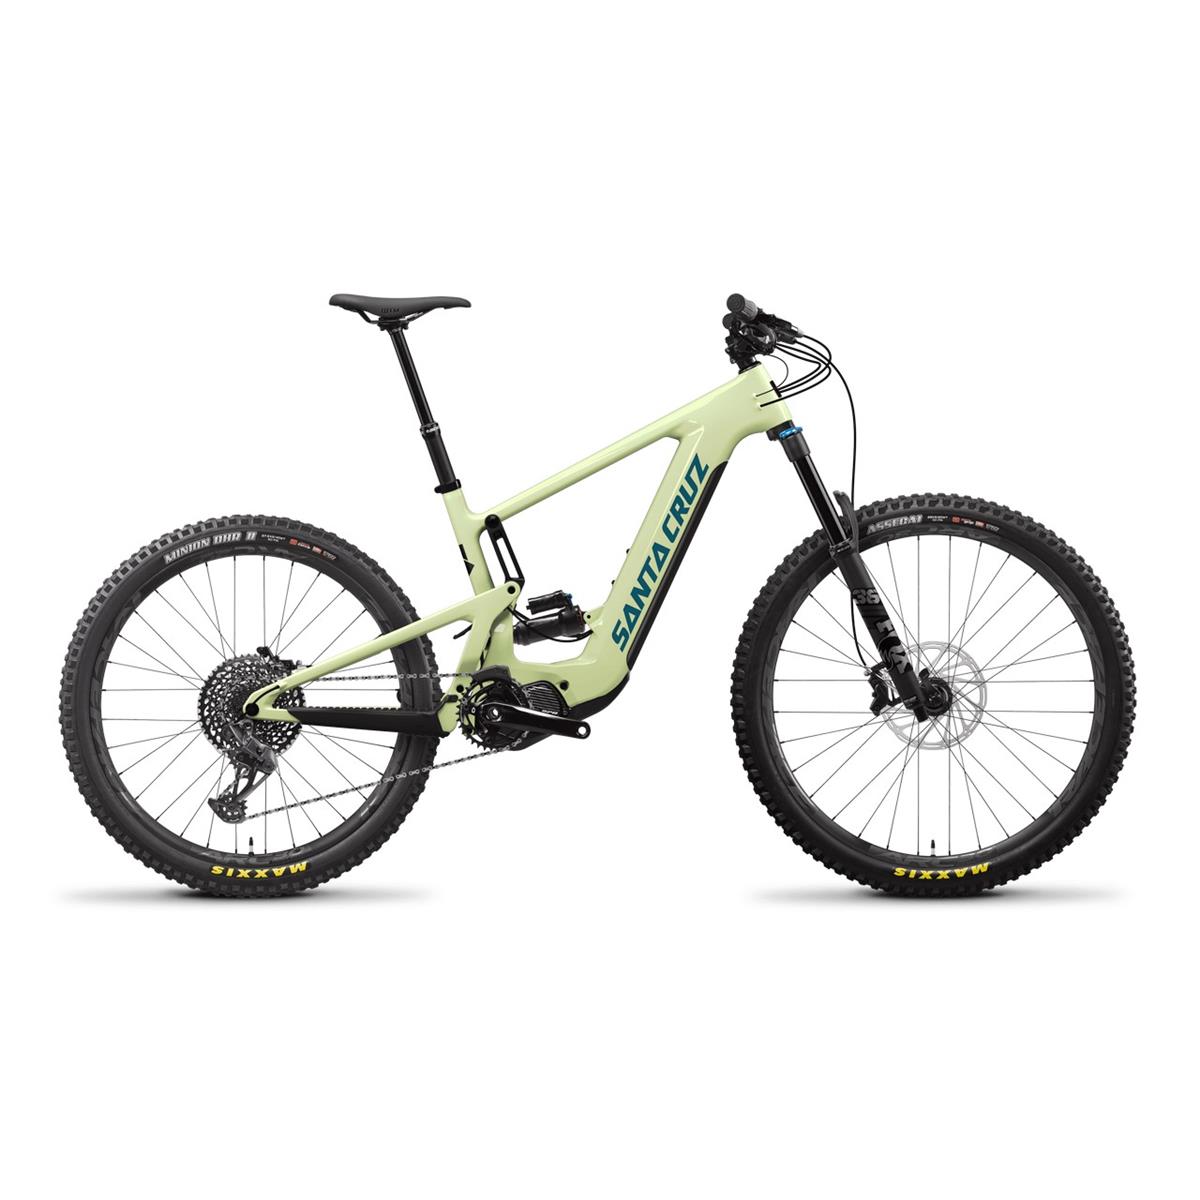 Heckler 9 C S MX 29/27.5'' 160mm 12s 720Wh Shimano EP8 Verde Aguacate 2023 Talla M